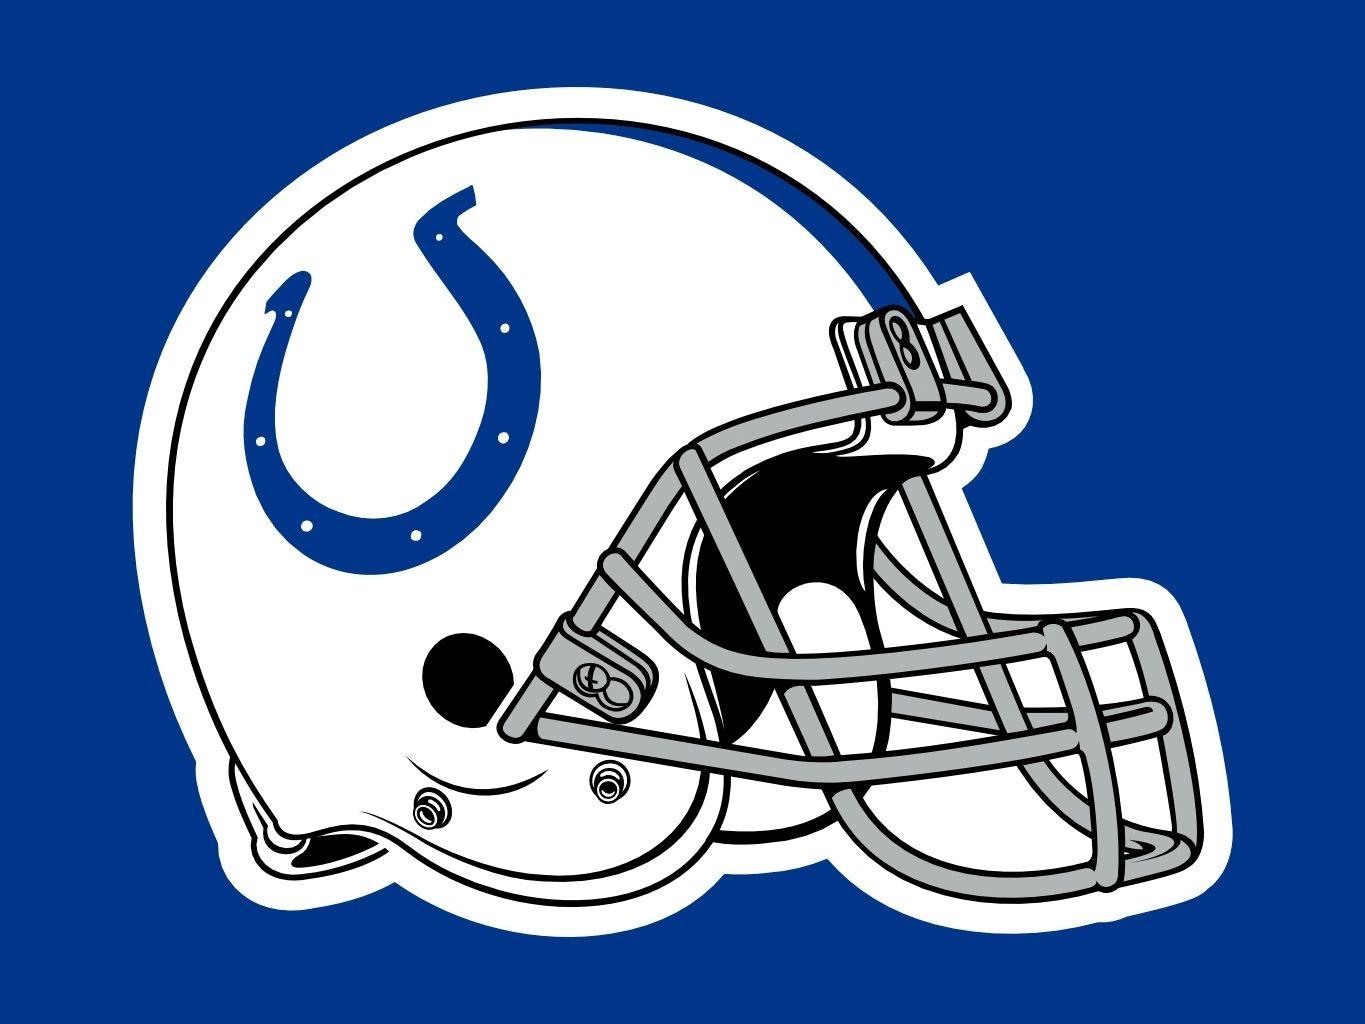 Helmet clipart colts and in color helmet clipart colts